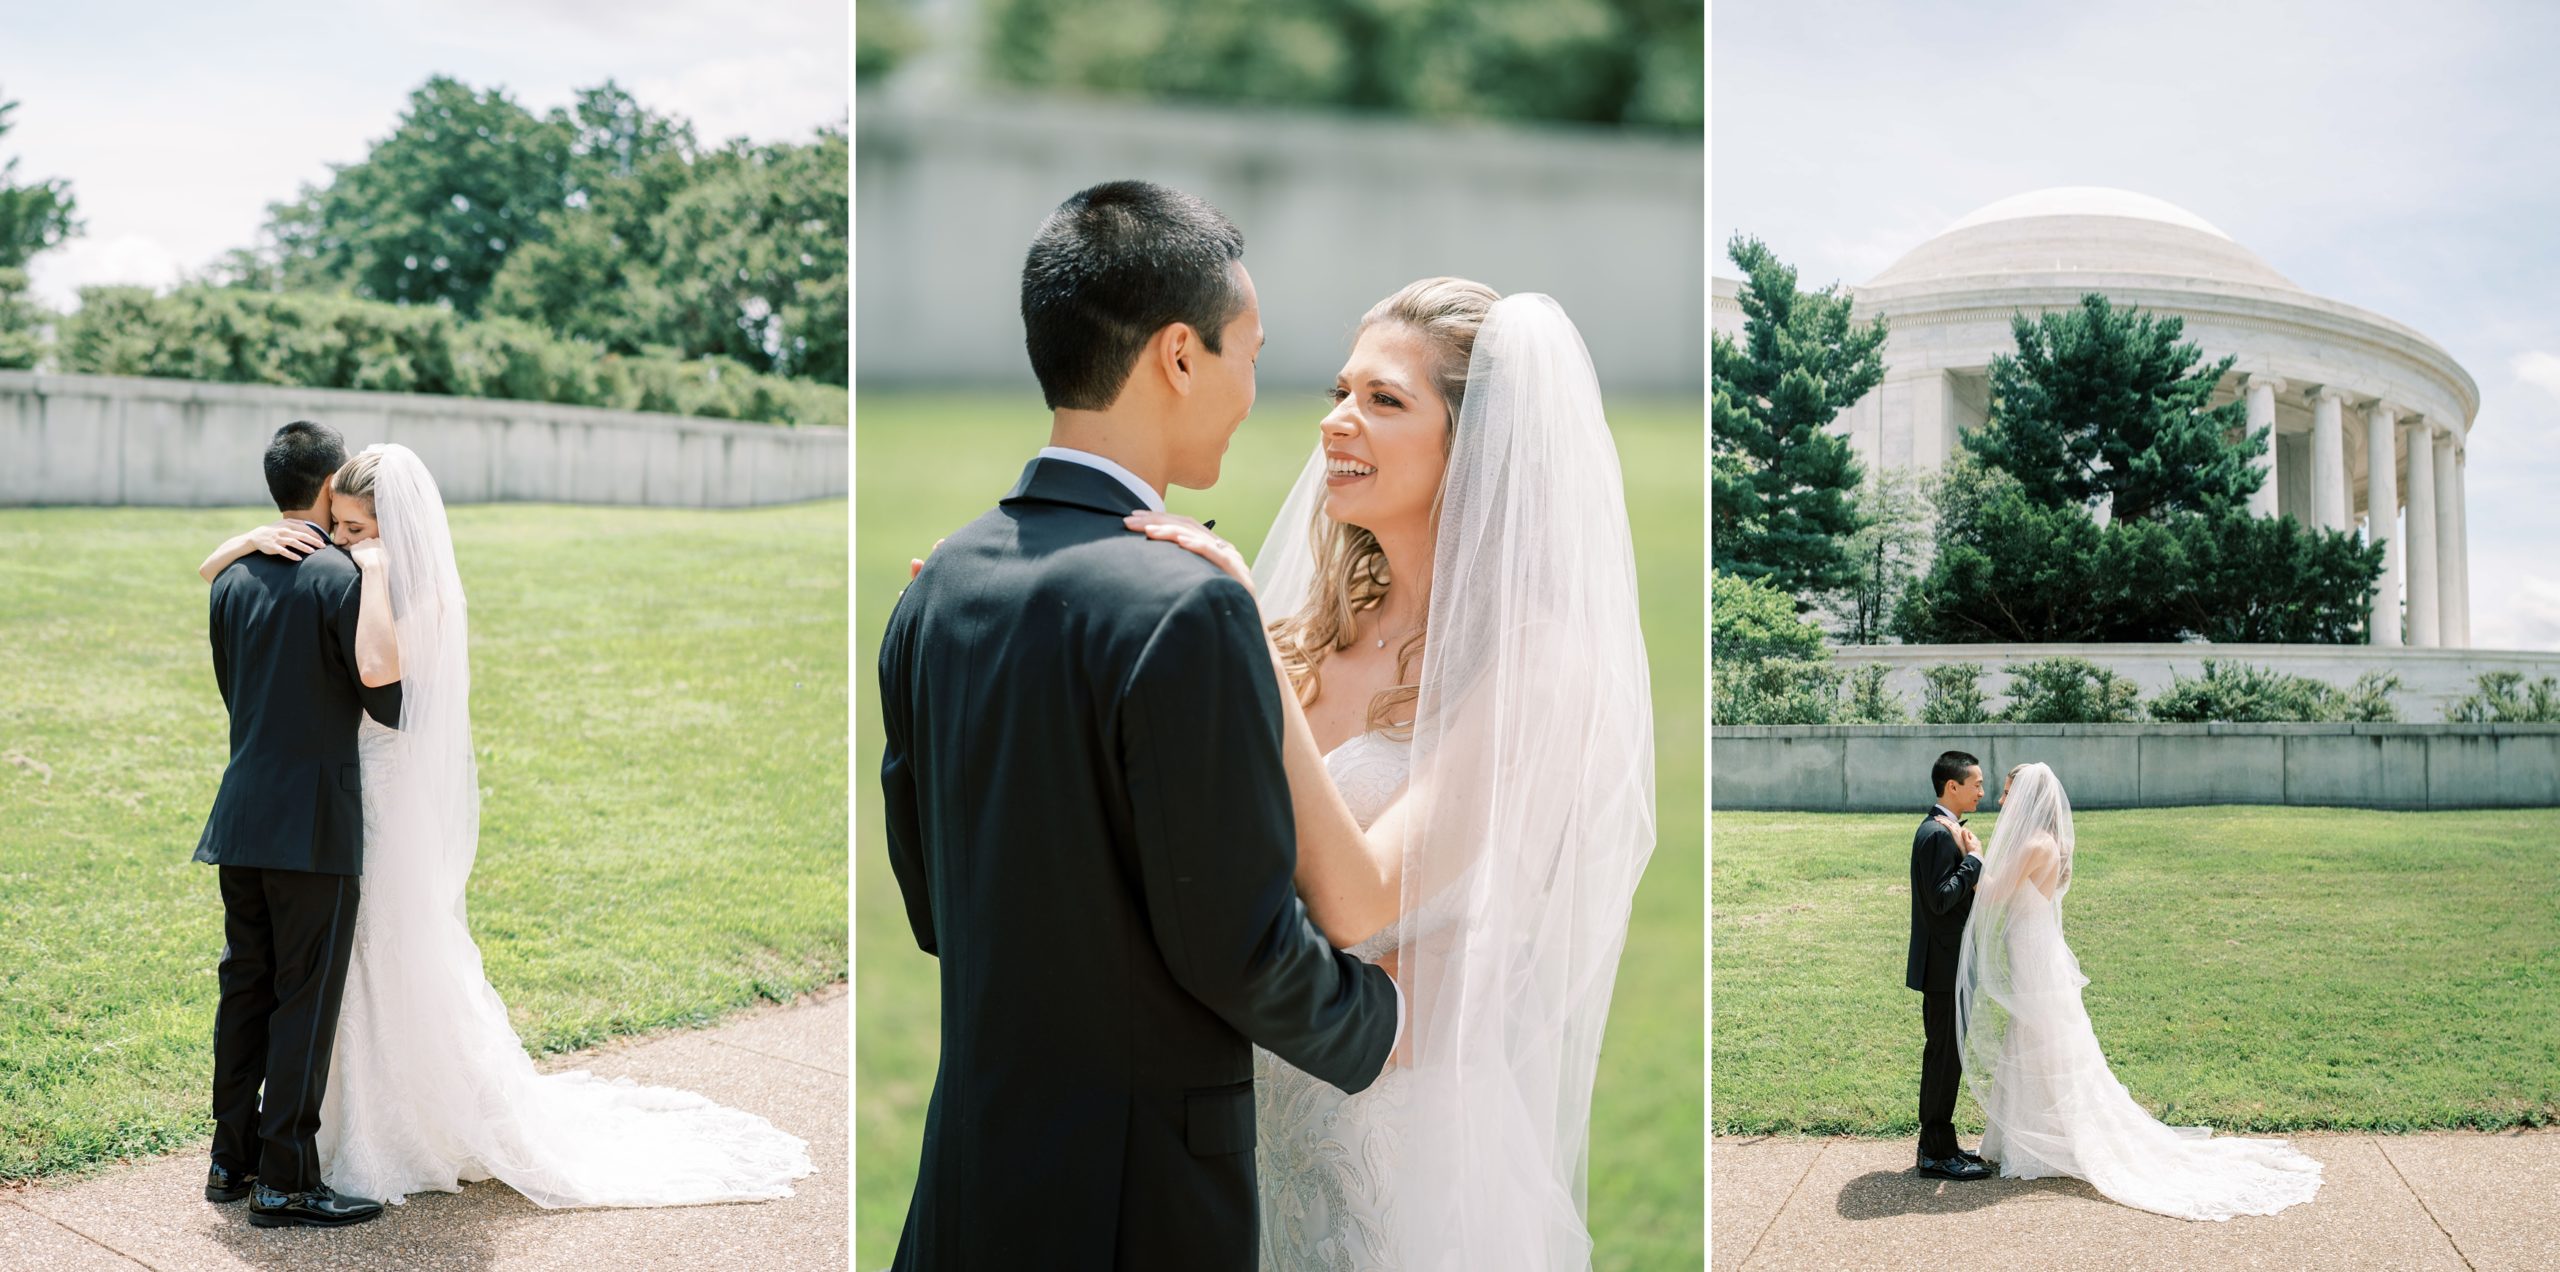 This Washington DC area wedding photographer provides information on a wedding day first look for engaged couples. 